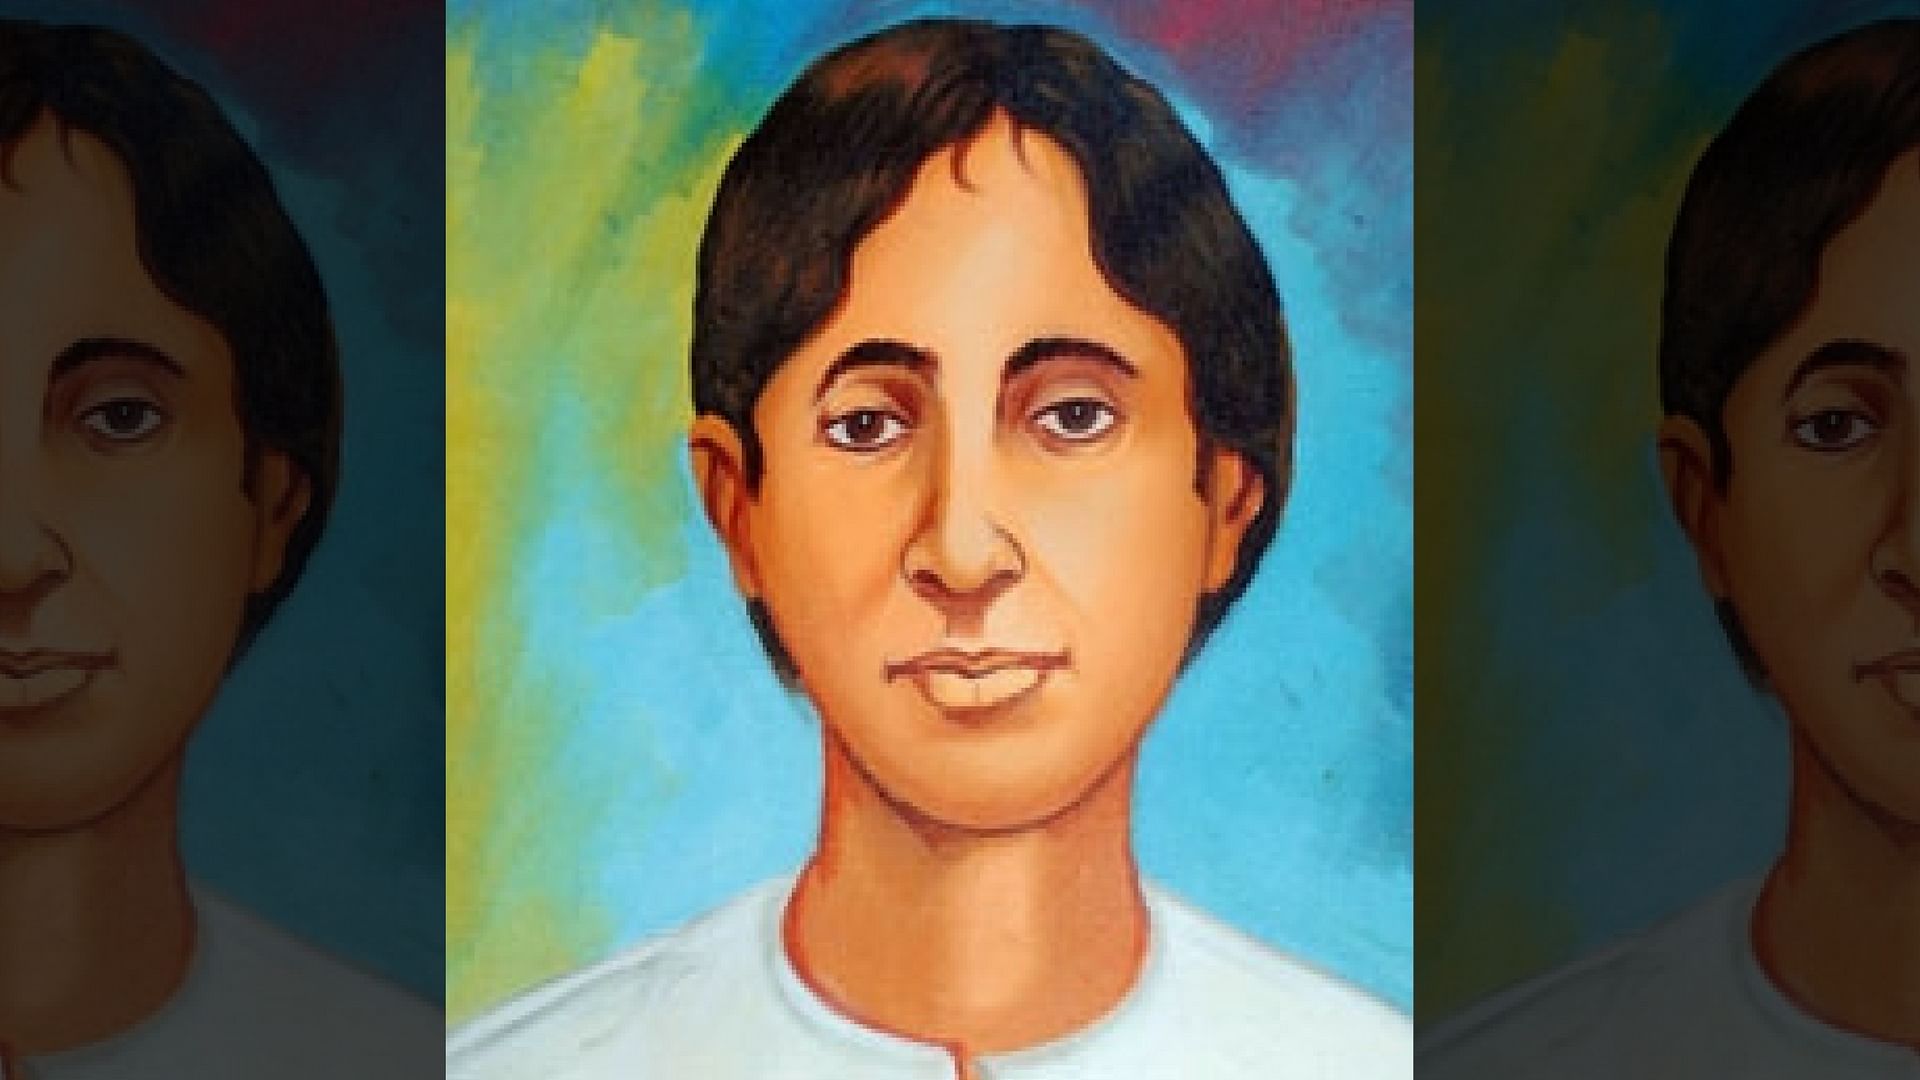 MASS Movement - August-11 Remembering Khudiram Bose, a young political  activist from Bengal, was not only one of the most prominent figures in  India's fight for freedom from British rule, but also